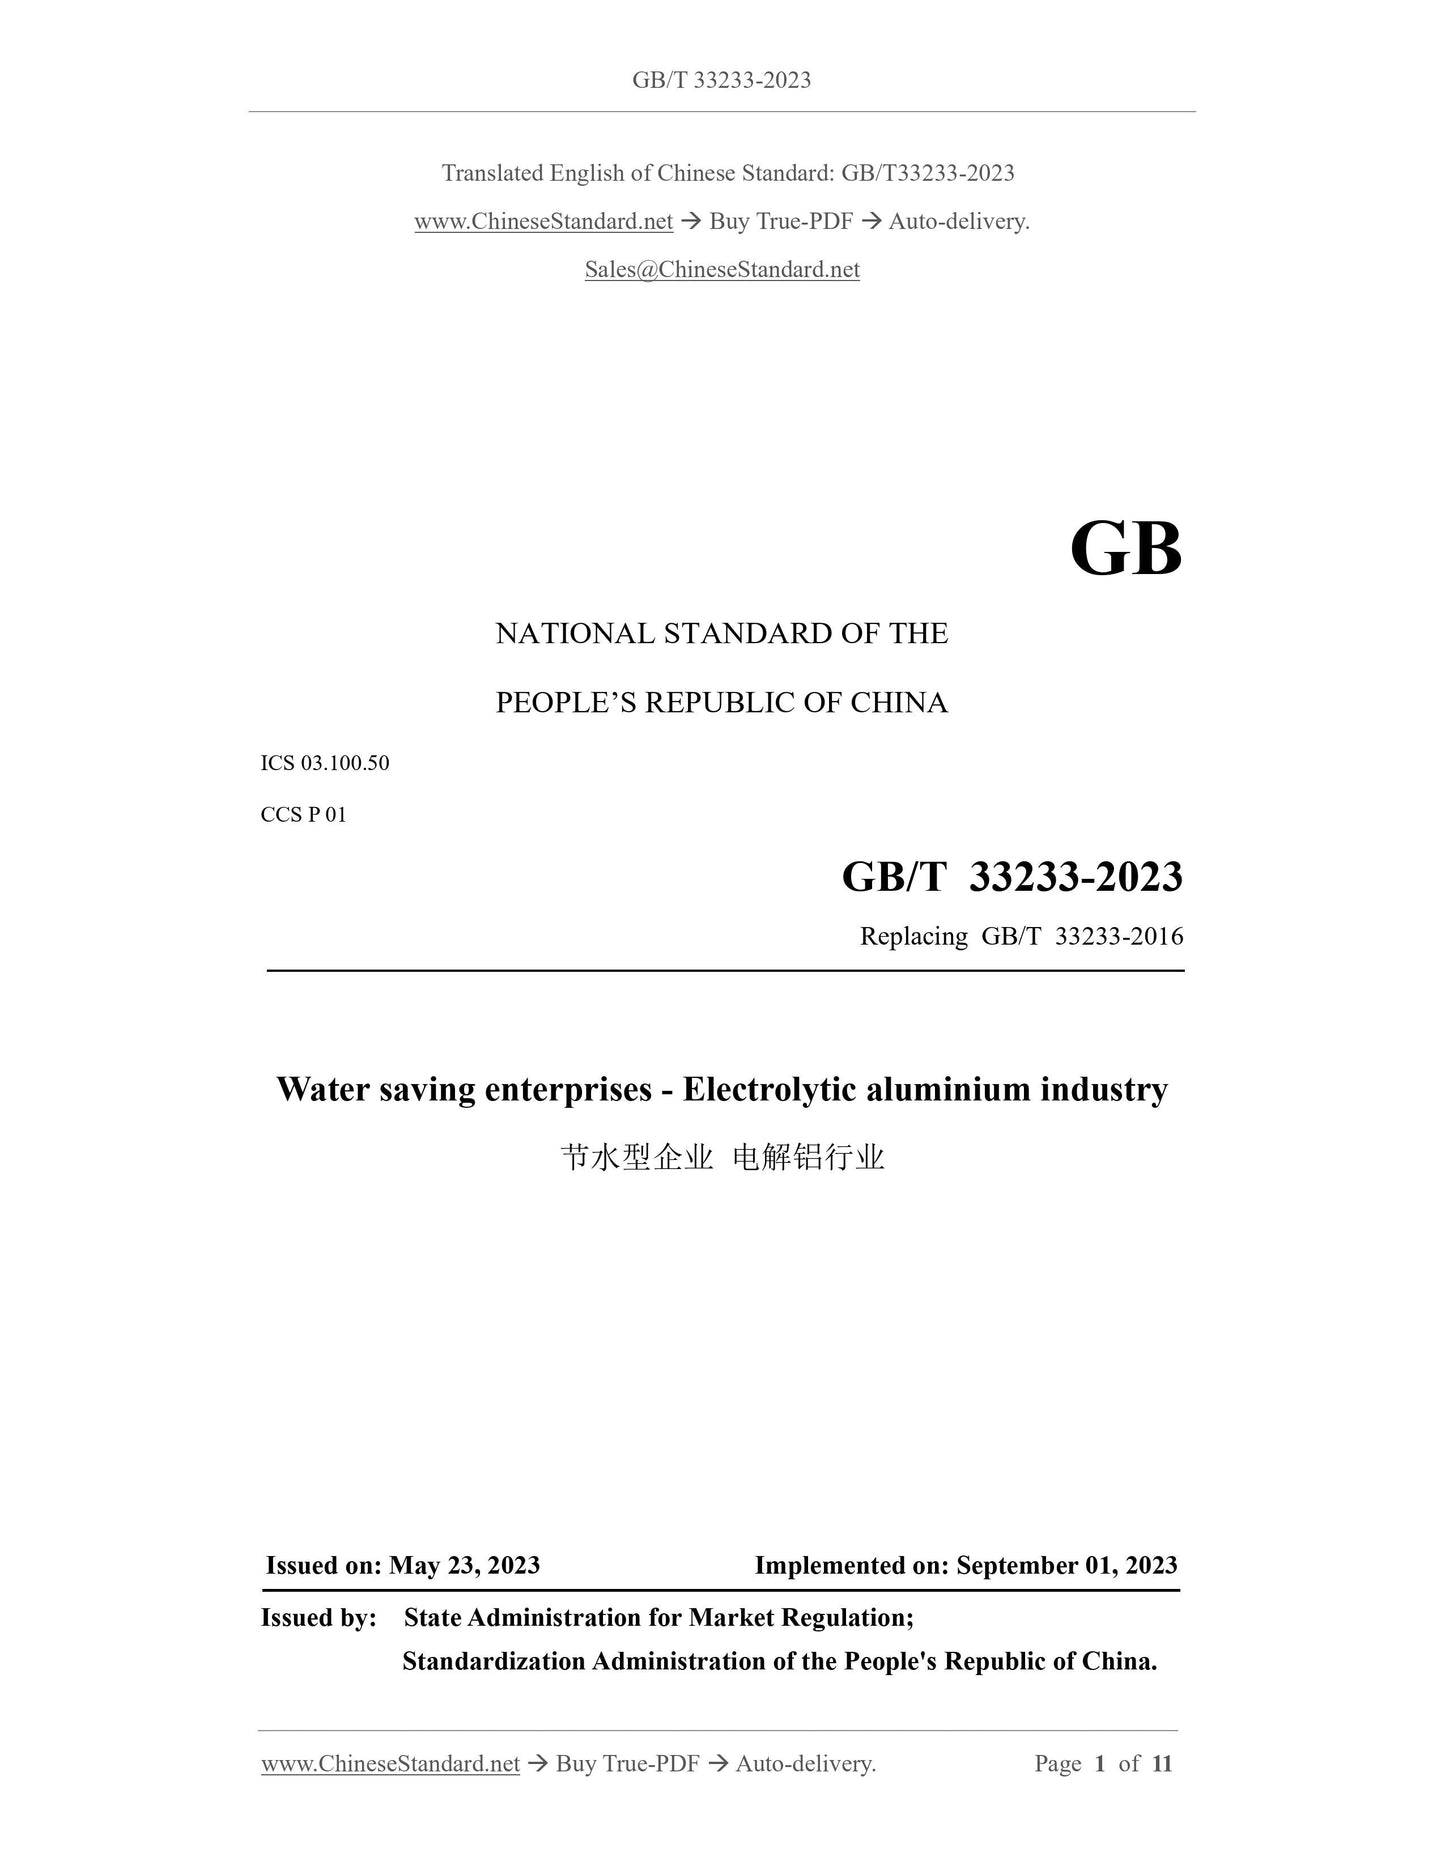 GB/T 33233-2023 Page 1